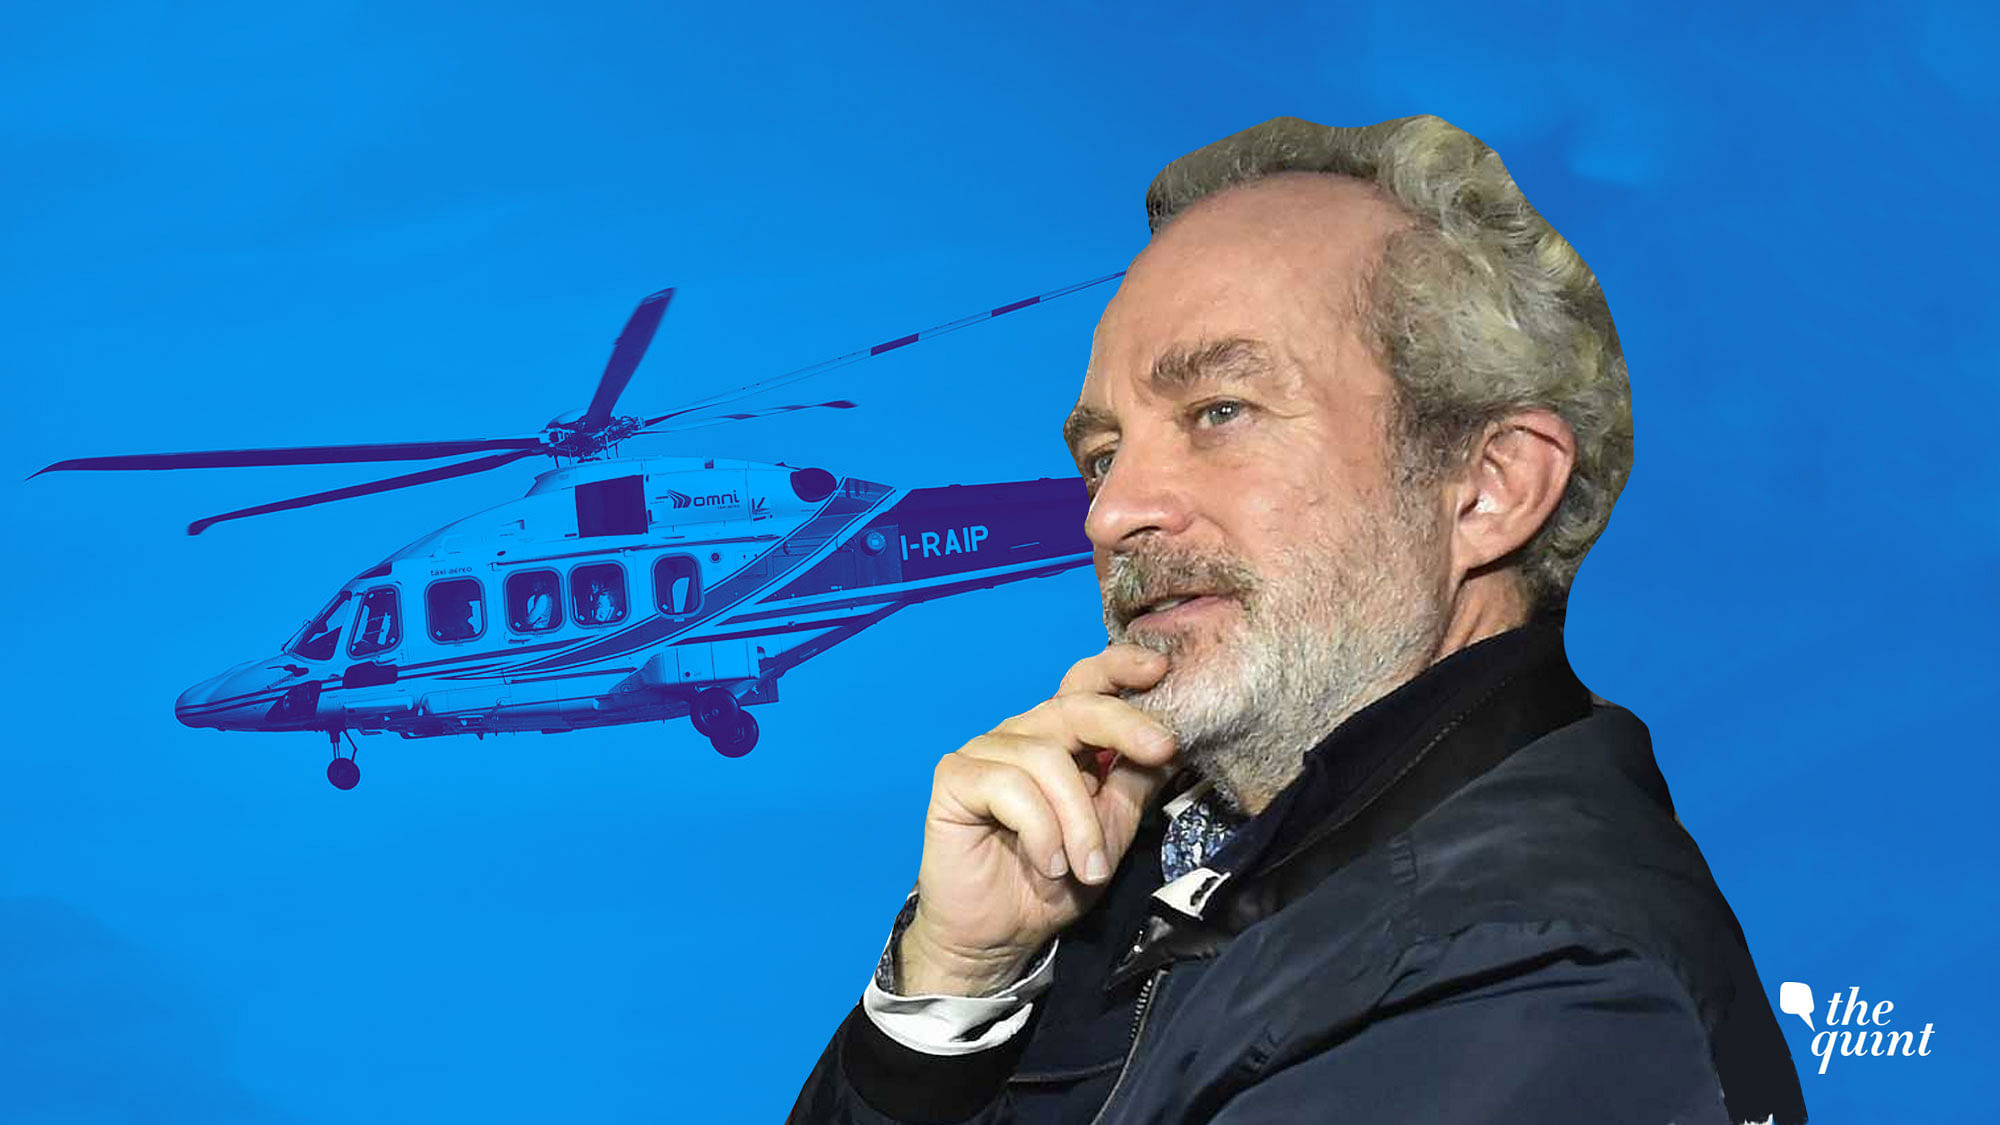 Christian Michel, the alleged middleman in the alleged AgustaWestland scam said that he was being treated like a “monkey in a zoo” in the prison.